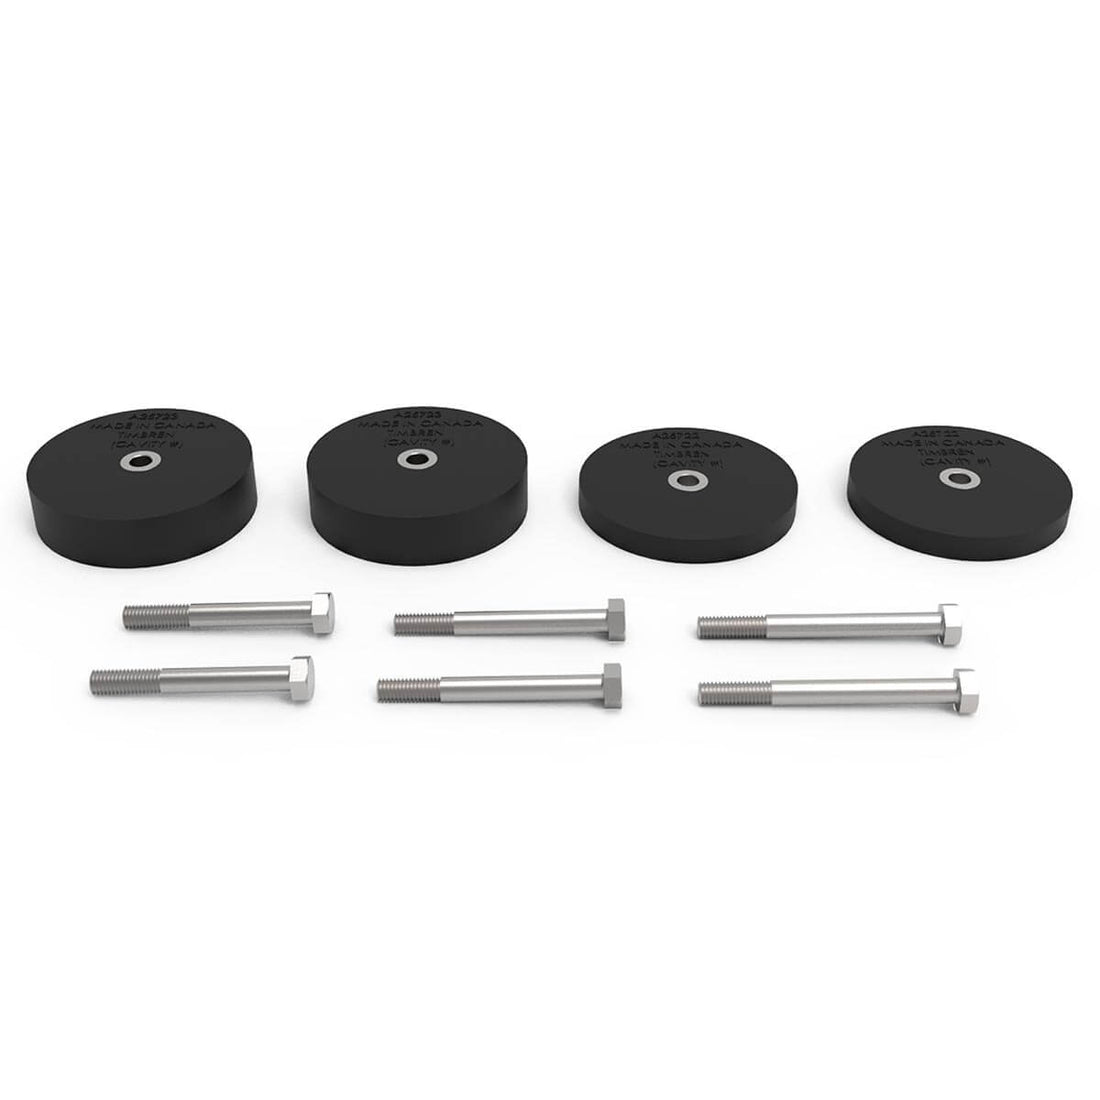 Spacer kit for Ford F250 & F350 – Timbren